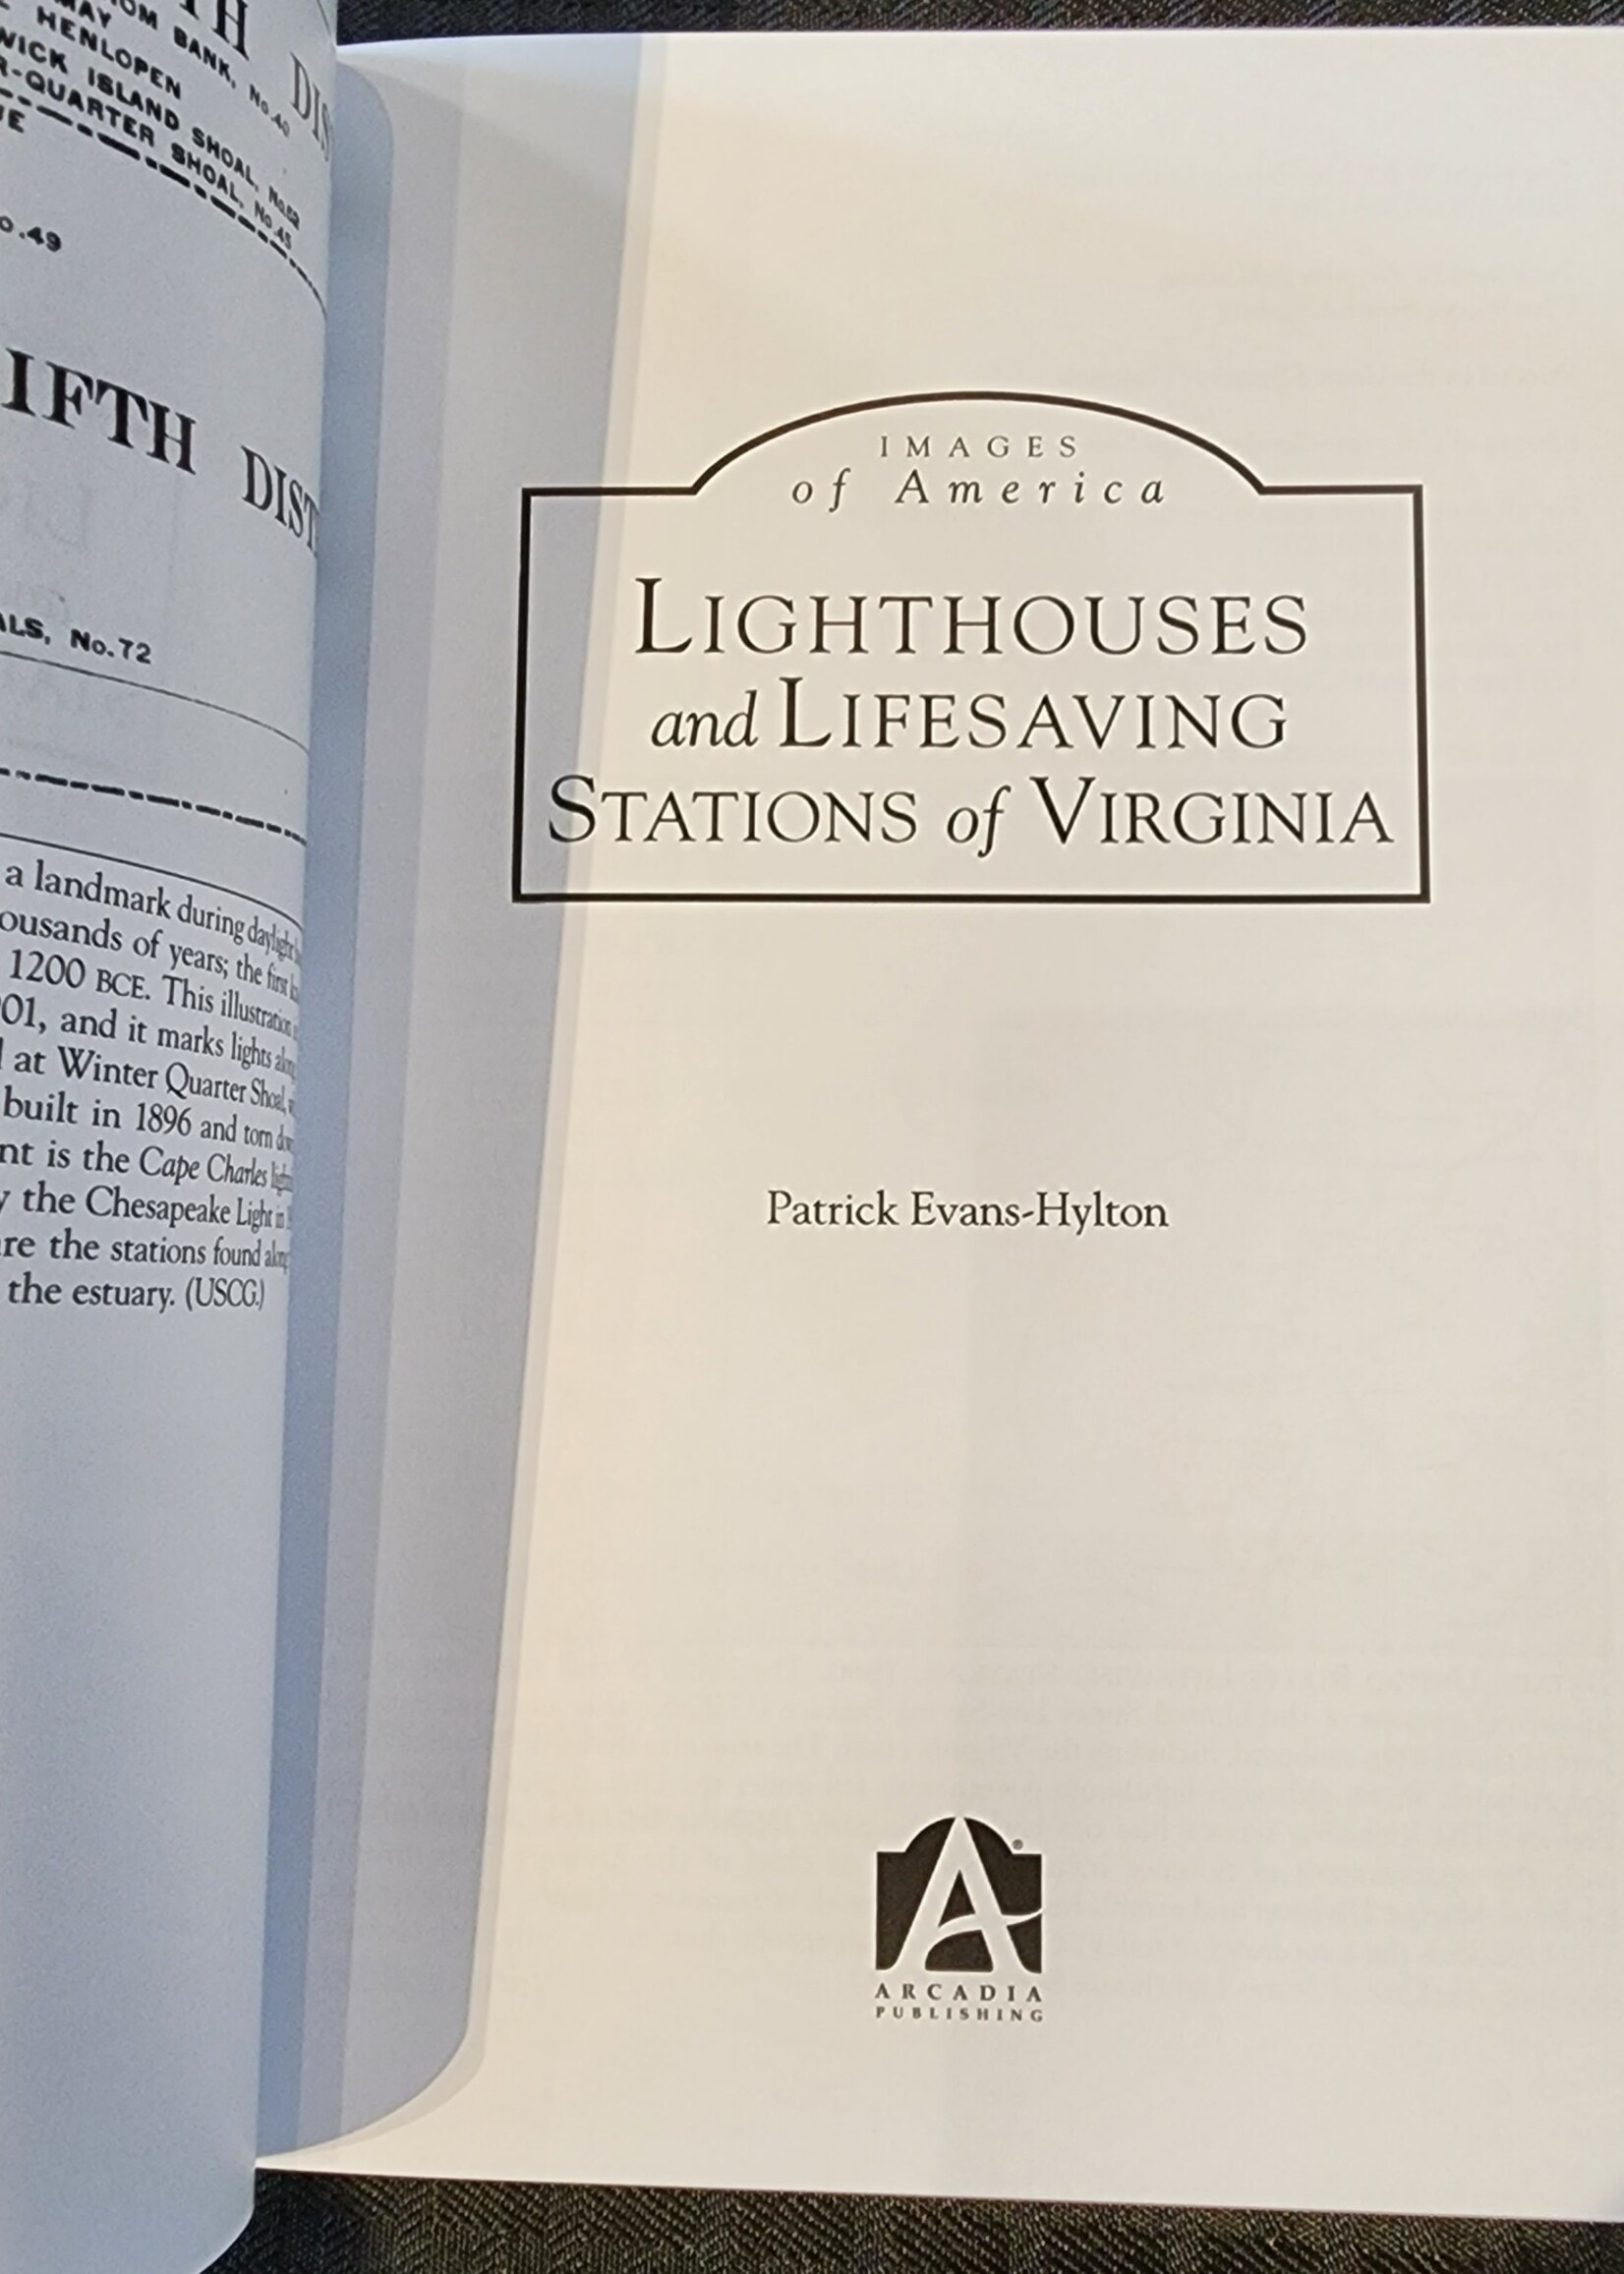 Images of America Images of America: Lighthouses and Lifesaving Stations of Virginia